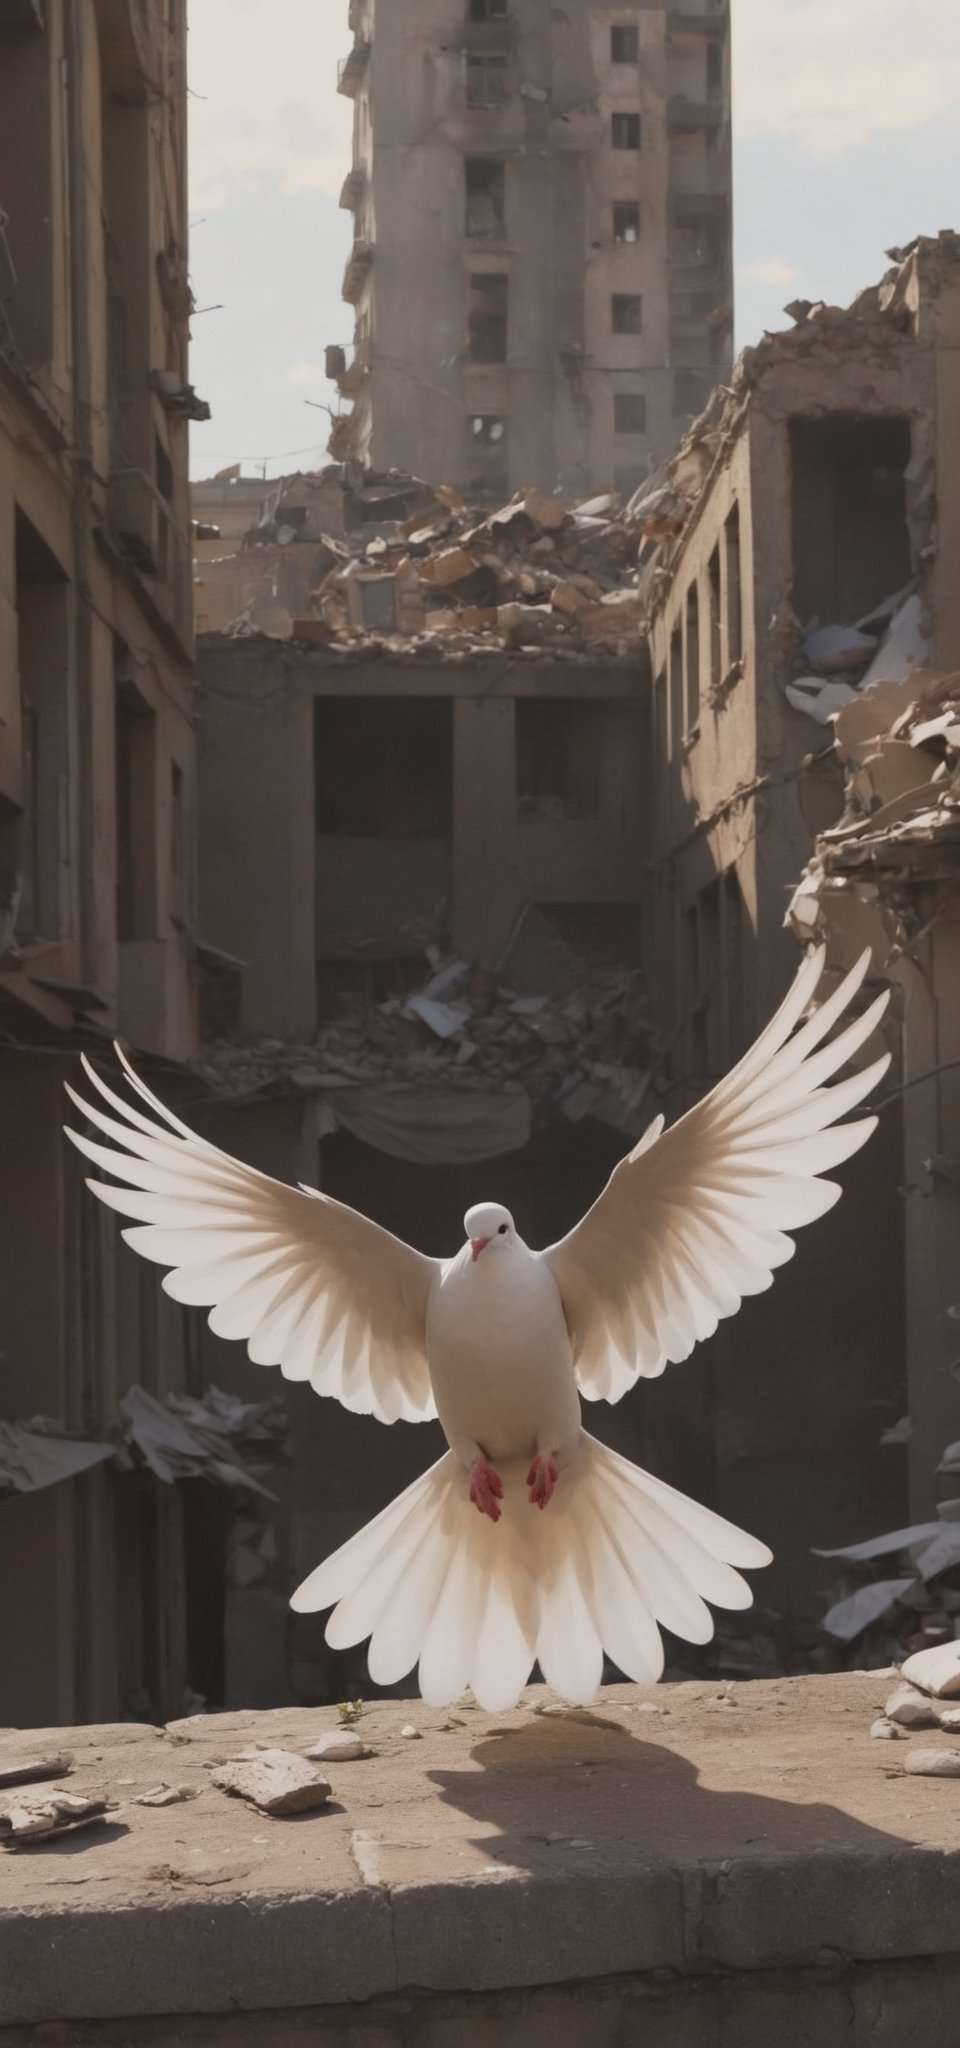 Imagine a scene of both moving beauty and desolation: A white dove, a symbol of peace, flies majestically over a city devastated by war. [The view is from above the pigeon, allowing us to see the pigeon flying and the city destroyed by bombs.] The image must be hyperrealistic, capturing every feather of the dove and every detail of the ruined city.

Use the following camera:
High resolution DSLR or mirrorless camera
And configuration:
Low ISO, (Wide Aperture: Use a wide aperture f/2.8), (Fast shutter speed, A speed of 1/1000 of a second or faster may be necessary), Continuous autofocus, RAW Shooting, Image stabilization